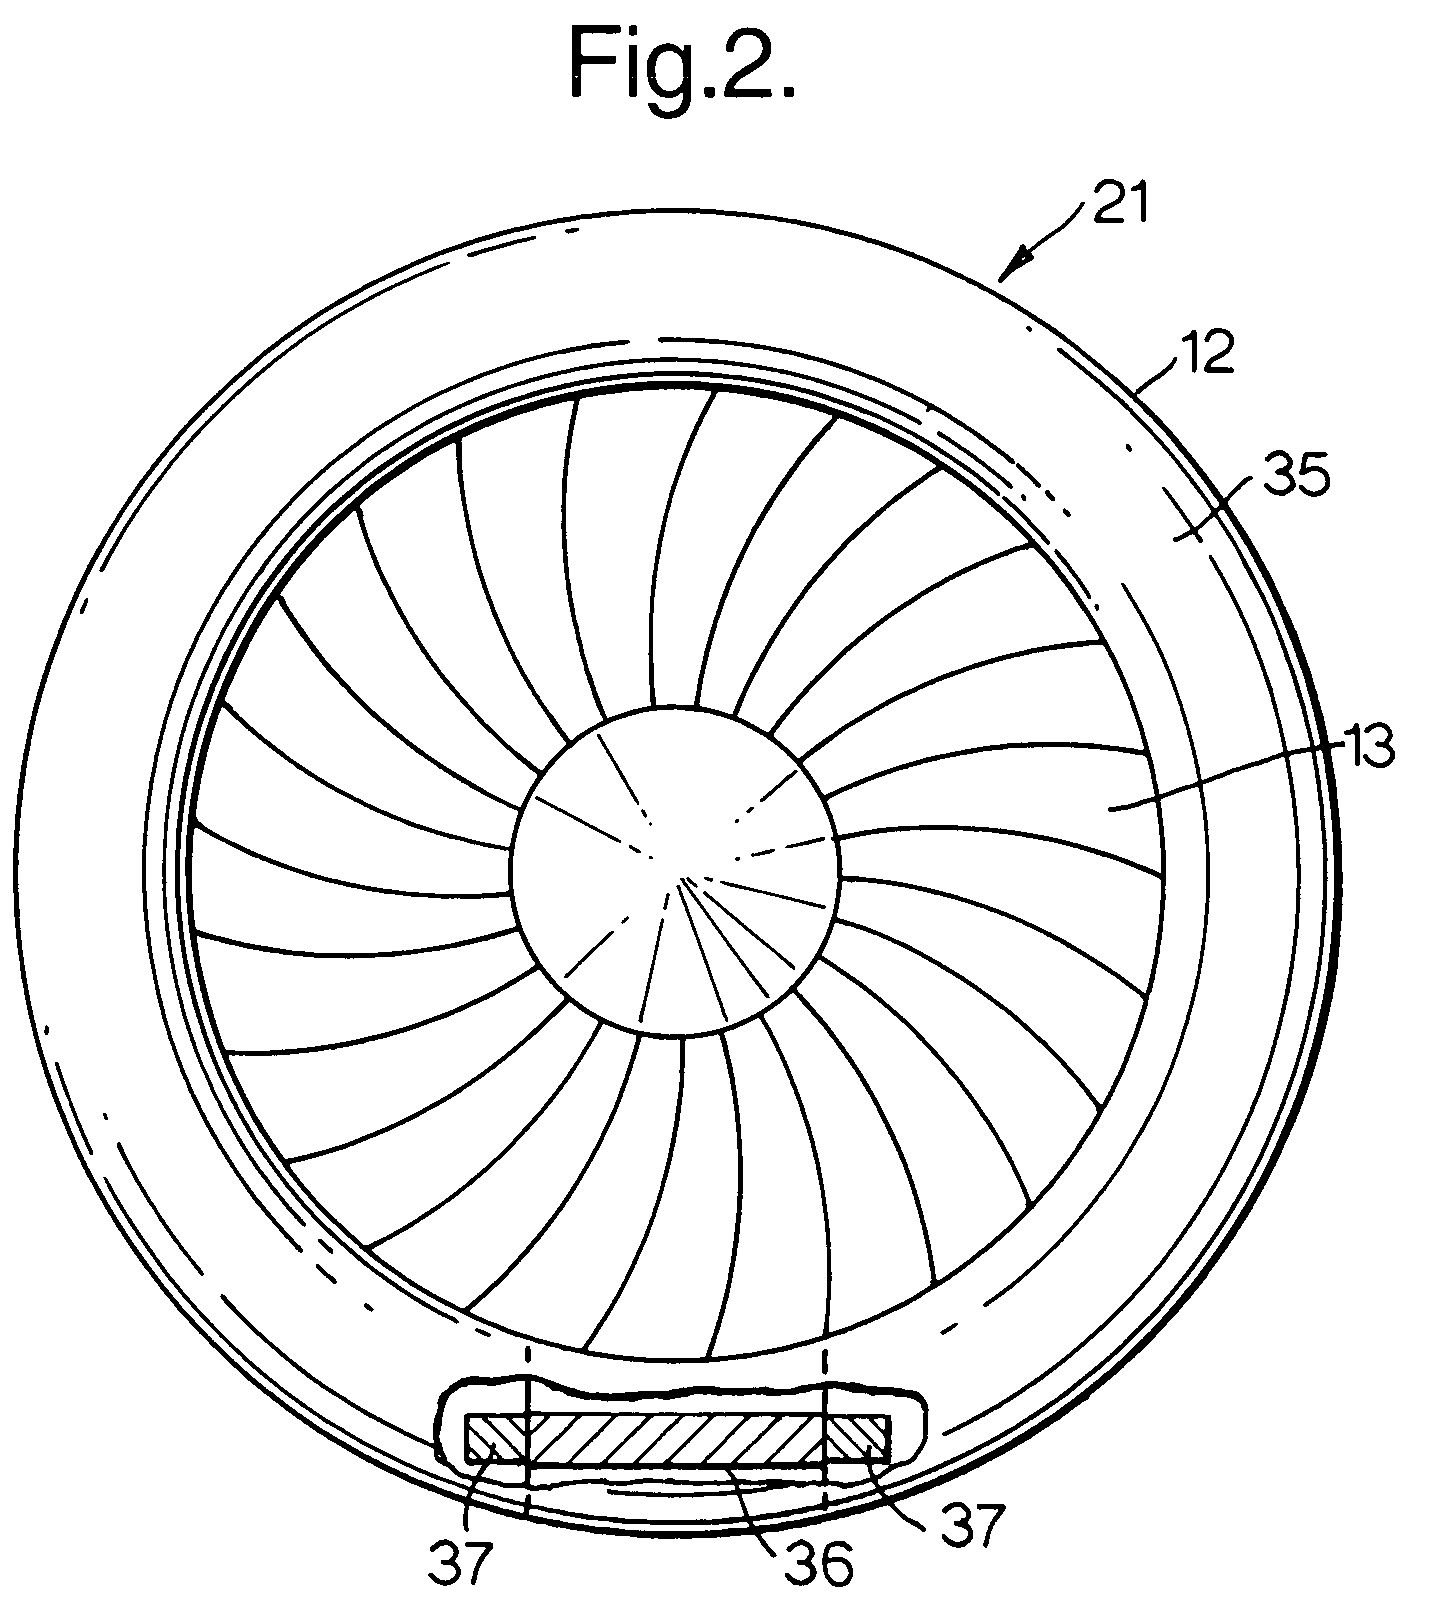 Aeroengine intake having a heat exchanger within an annular closed chamber